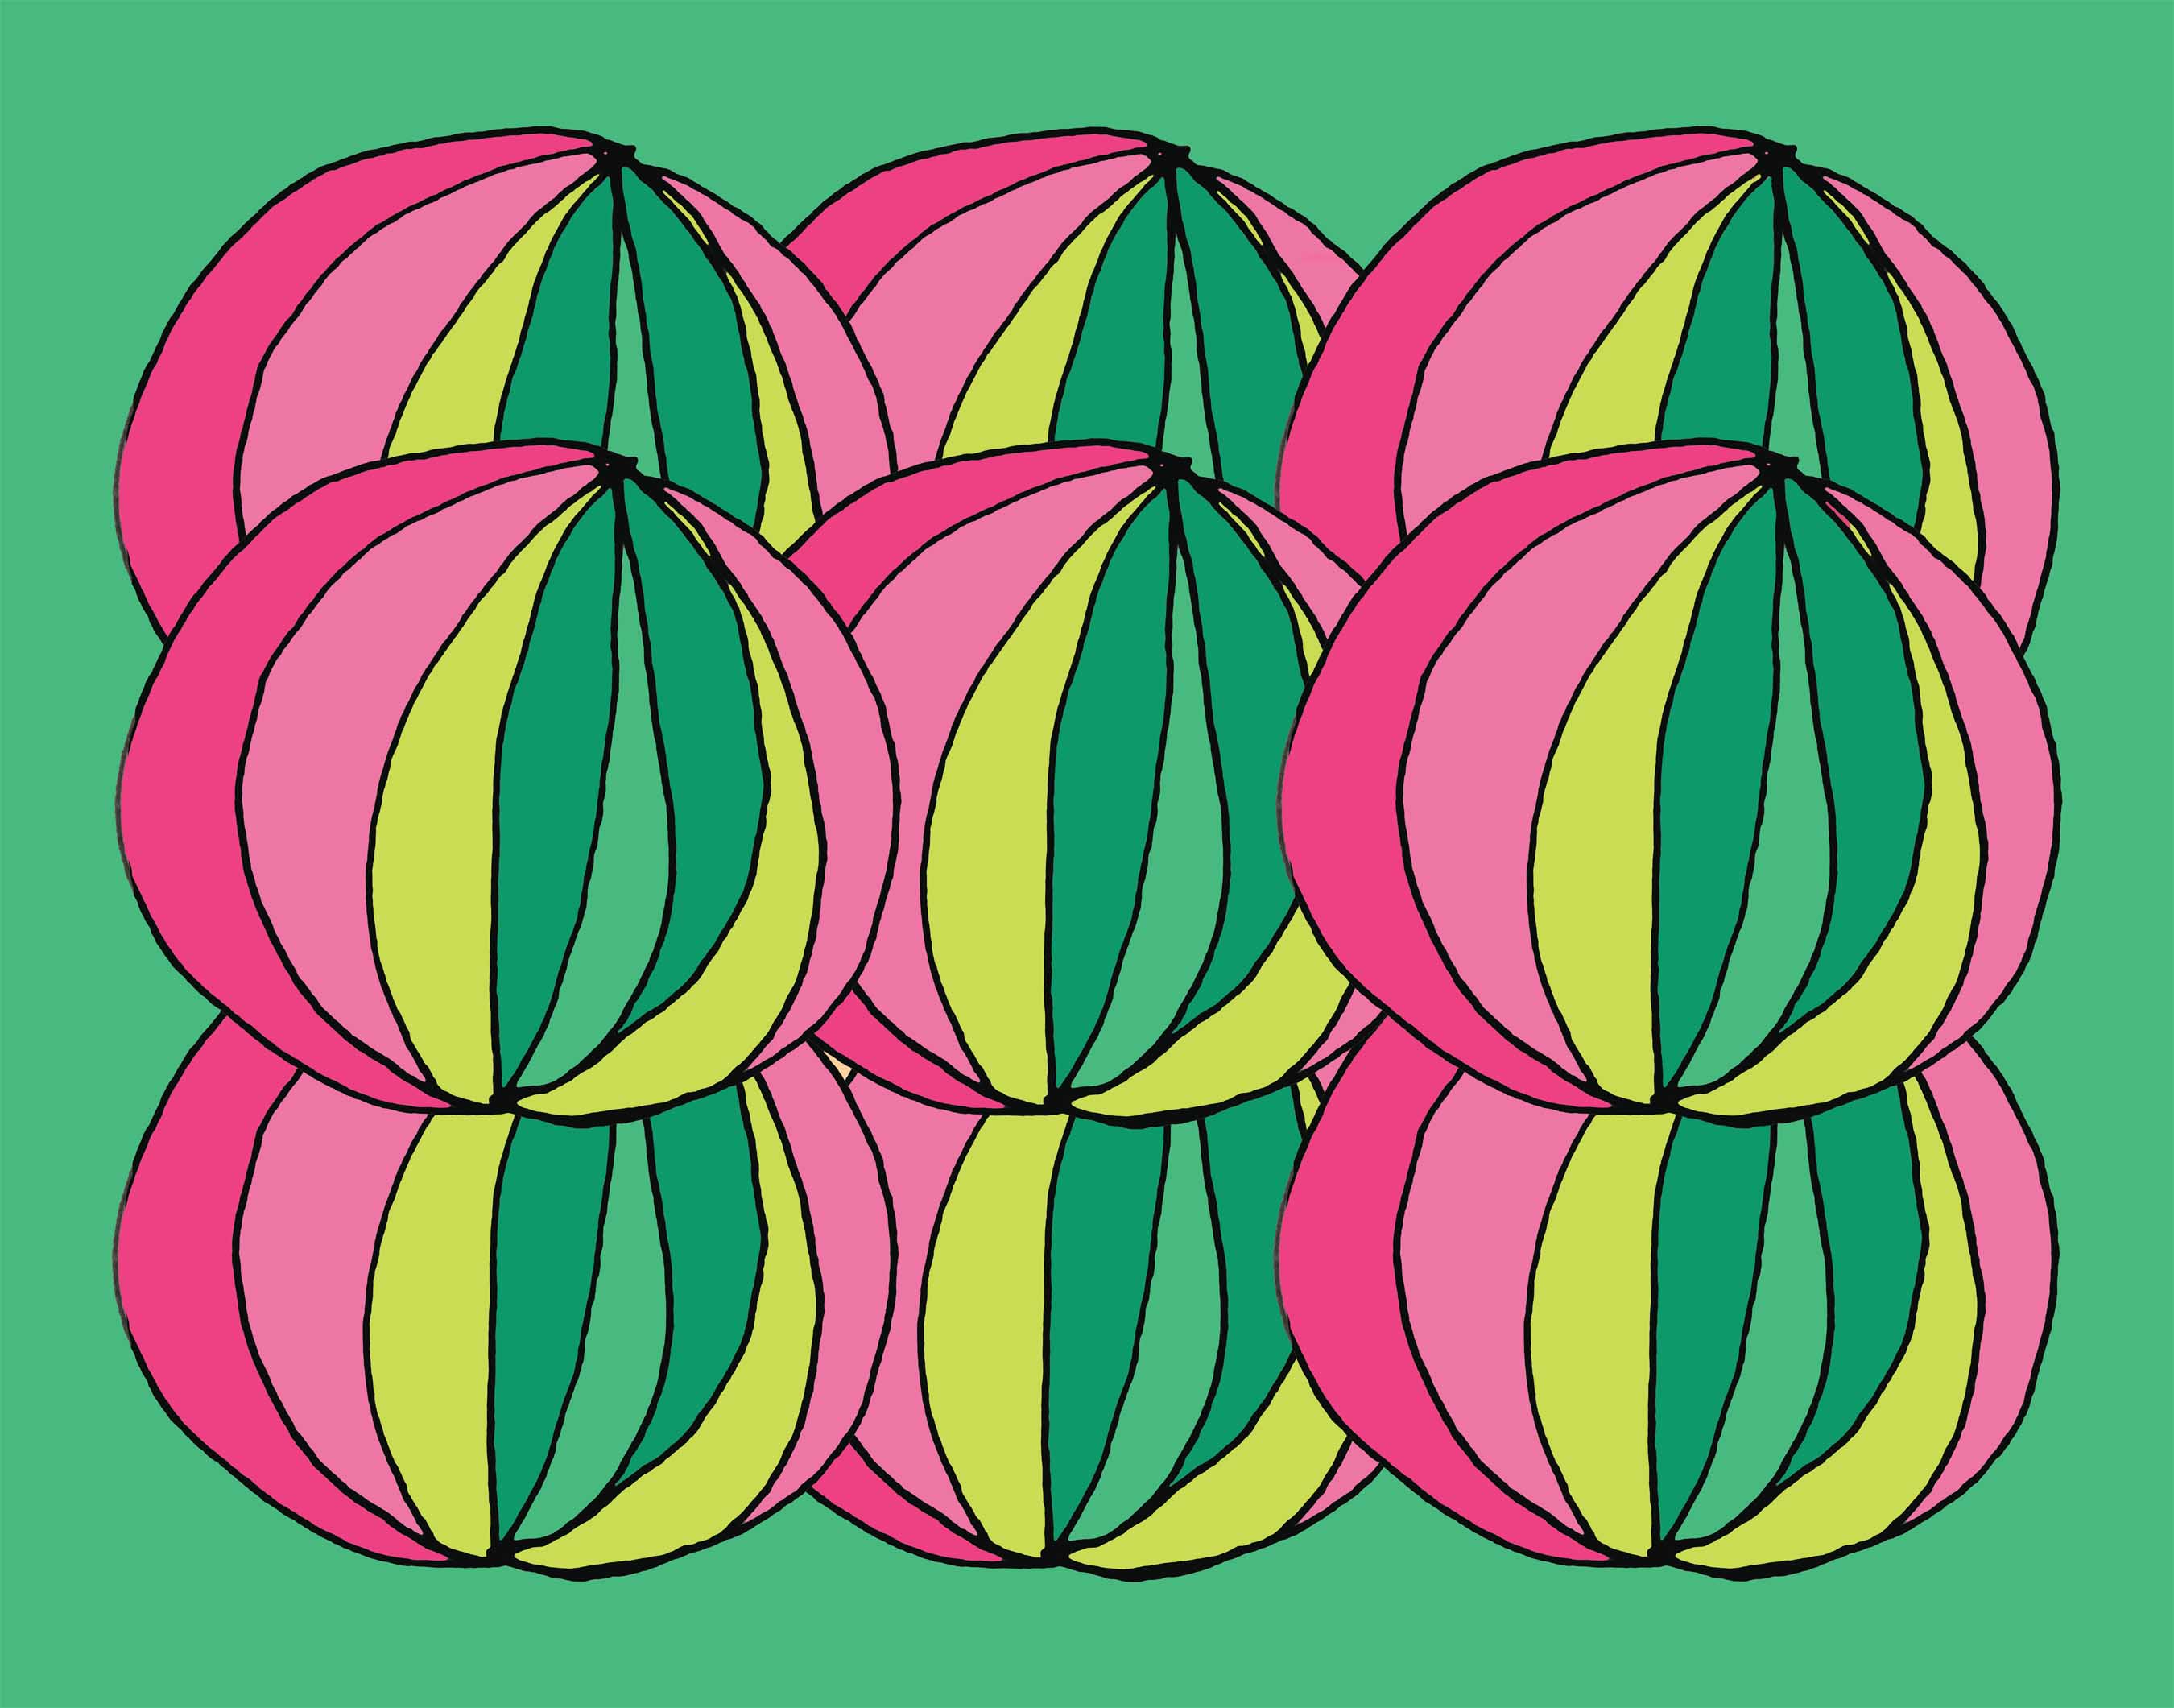 art every day number 338 / illustration / pattern / layered greens